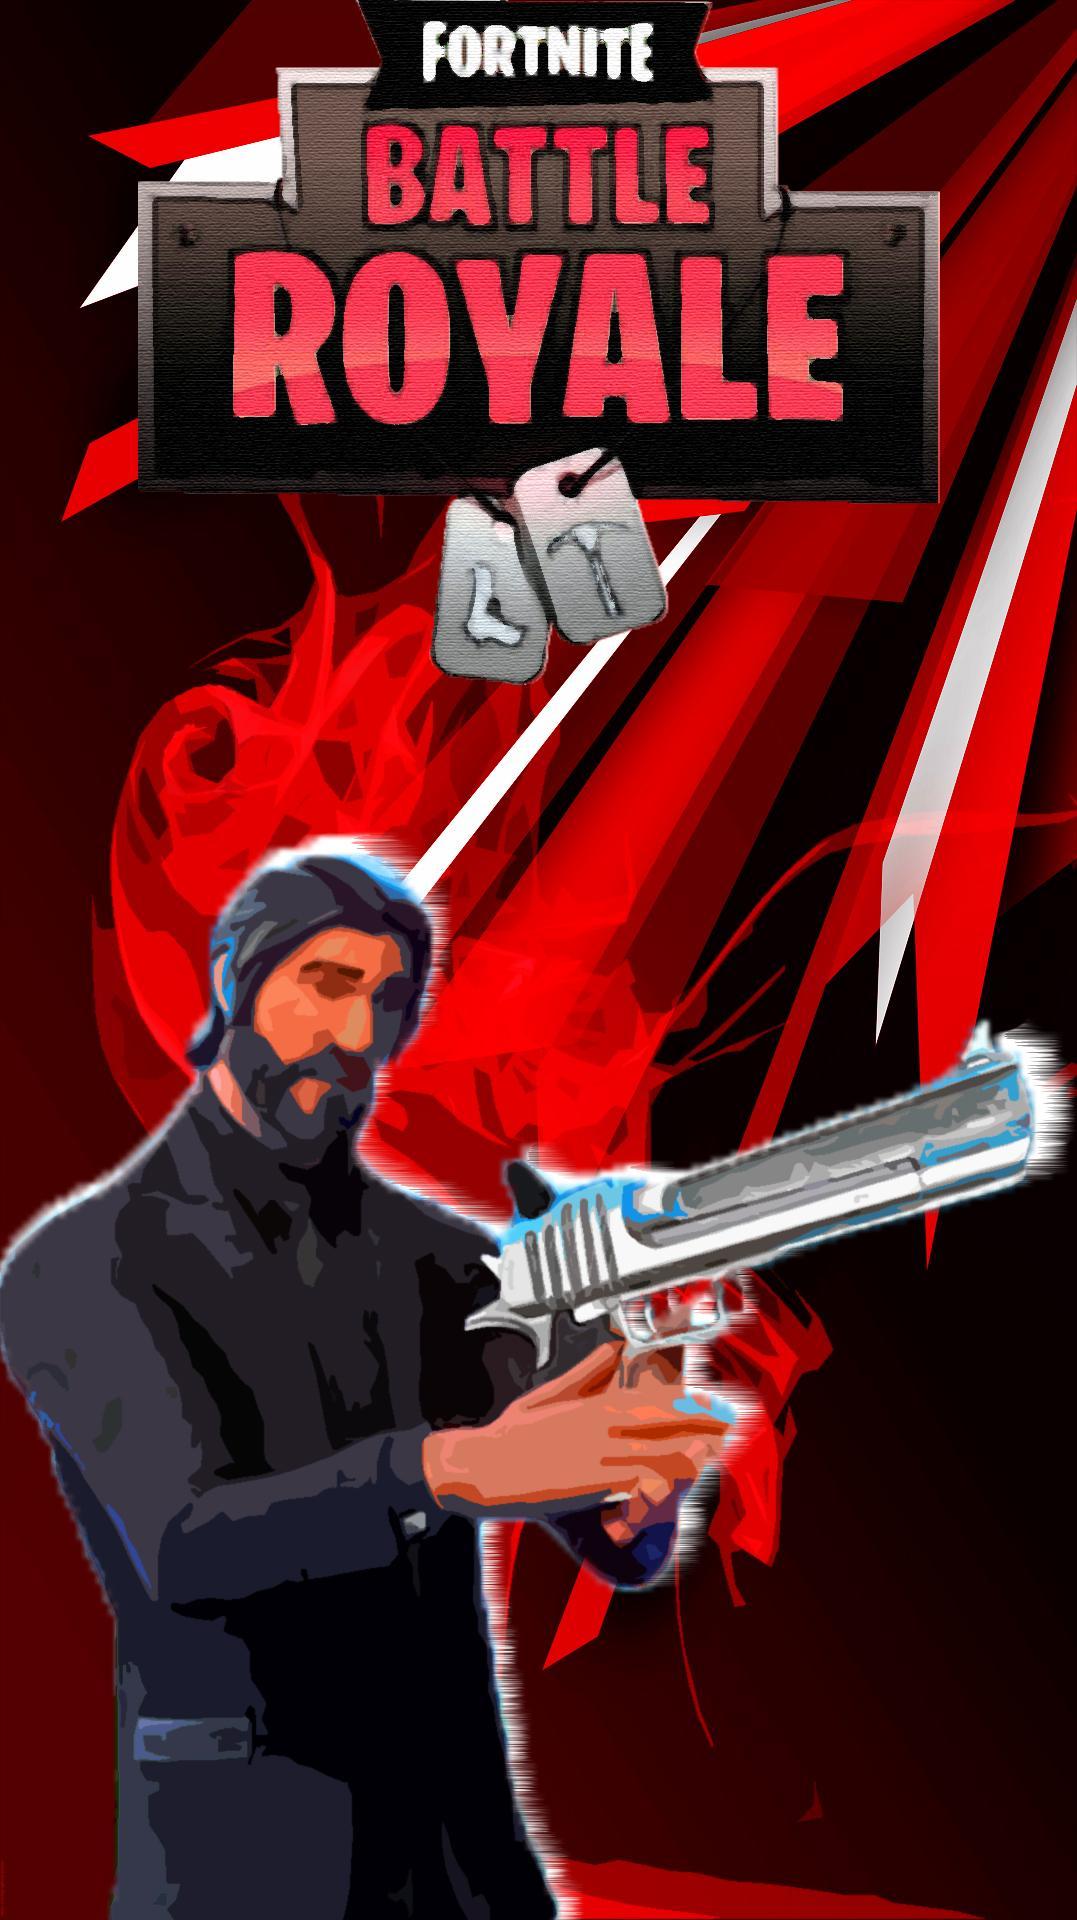 As requested by a friend, here's John Wick!